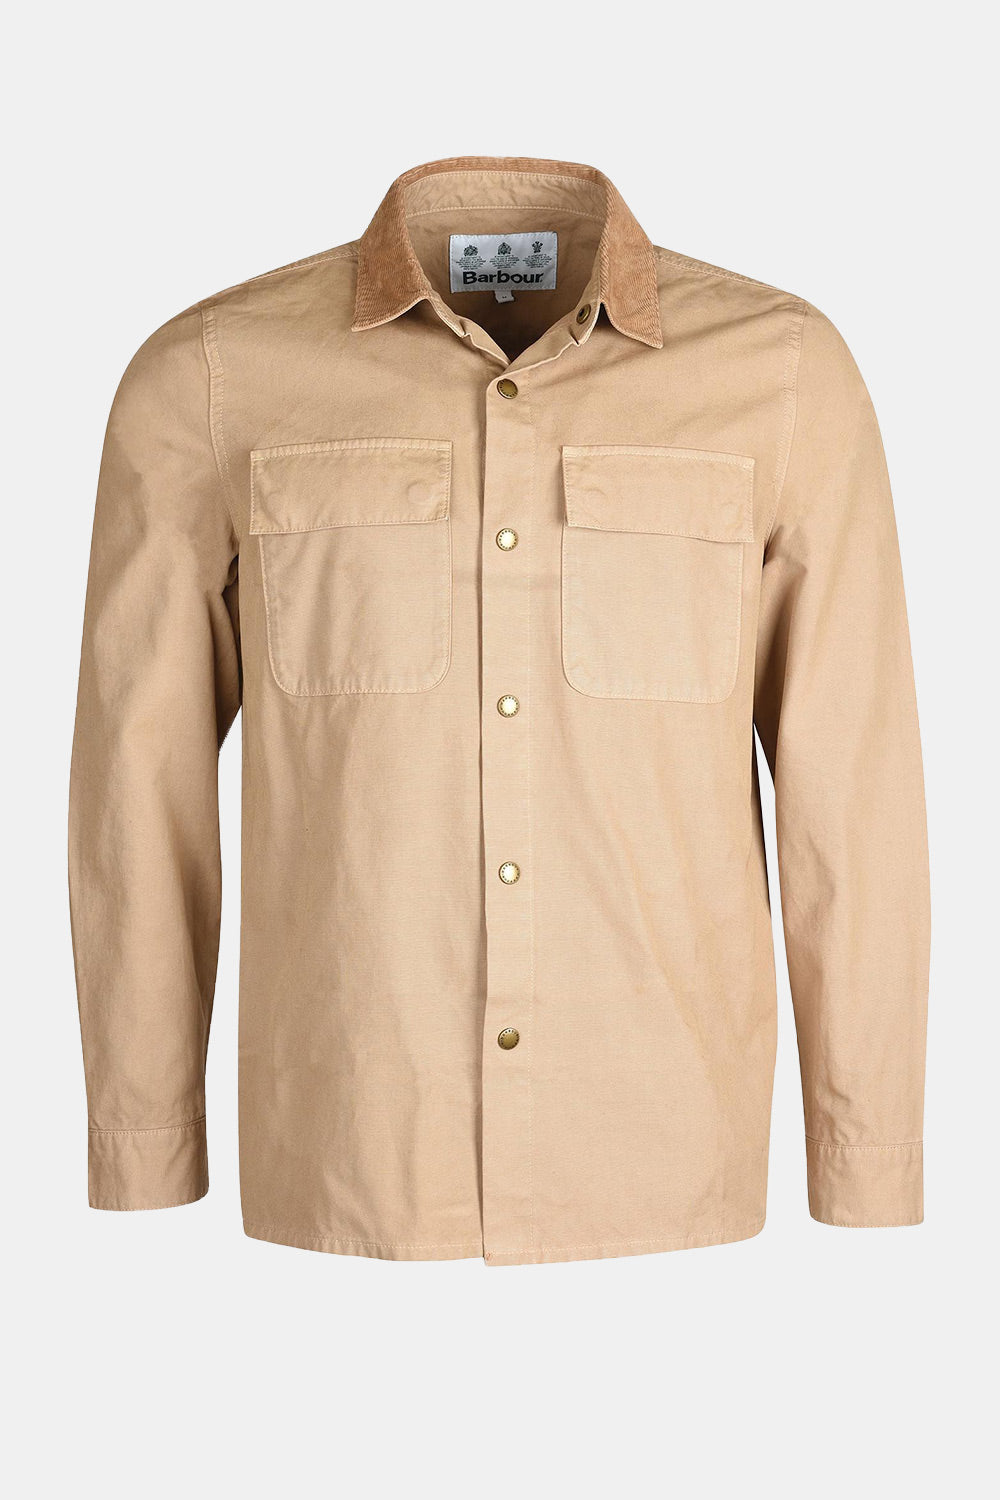 Barbour White Label Nico Heavy Washed Overshirt (Sand)